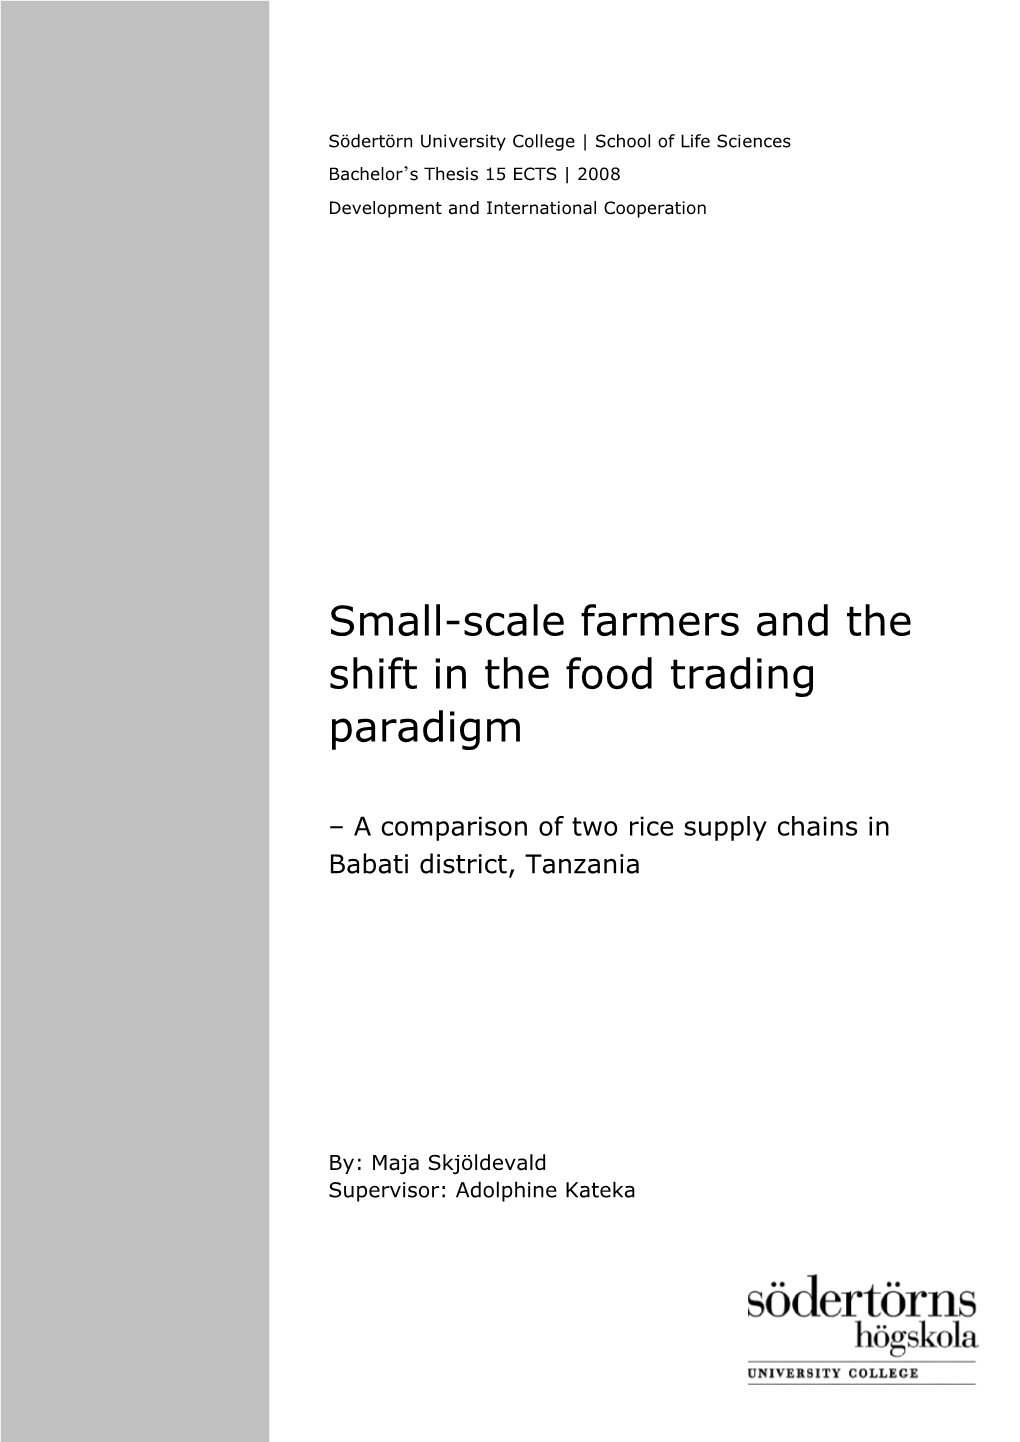 Small-Scale Farmers and the Shift in the Food Trading Paradigm